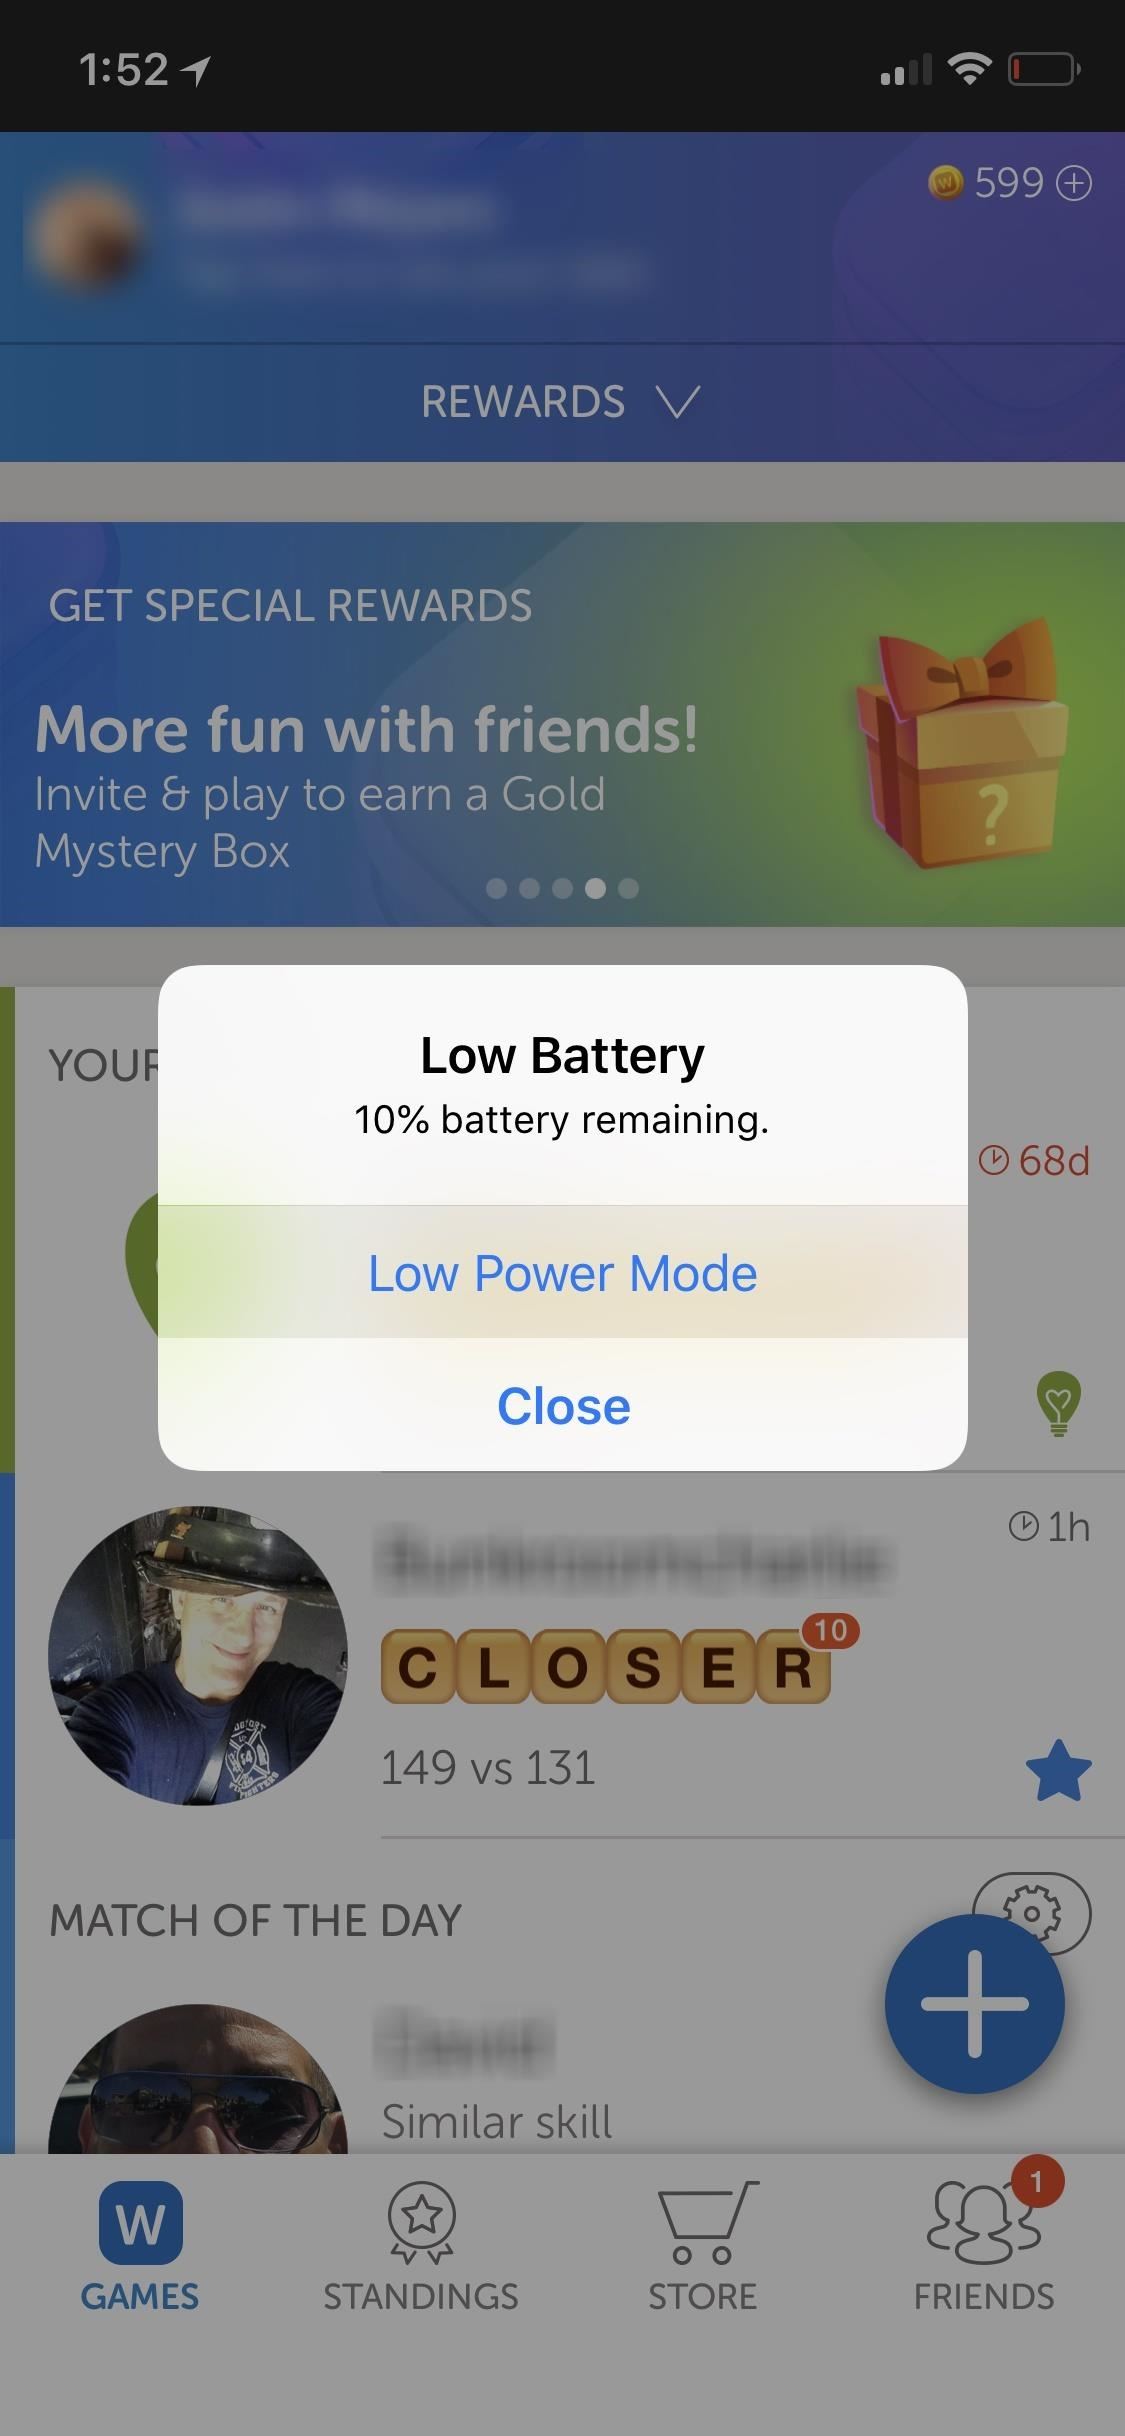 How to Turn Off 'Low Power Mode' on Your iPhone to Speed Things Up Again